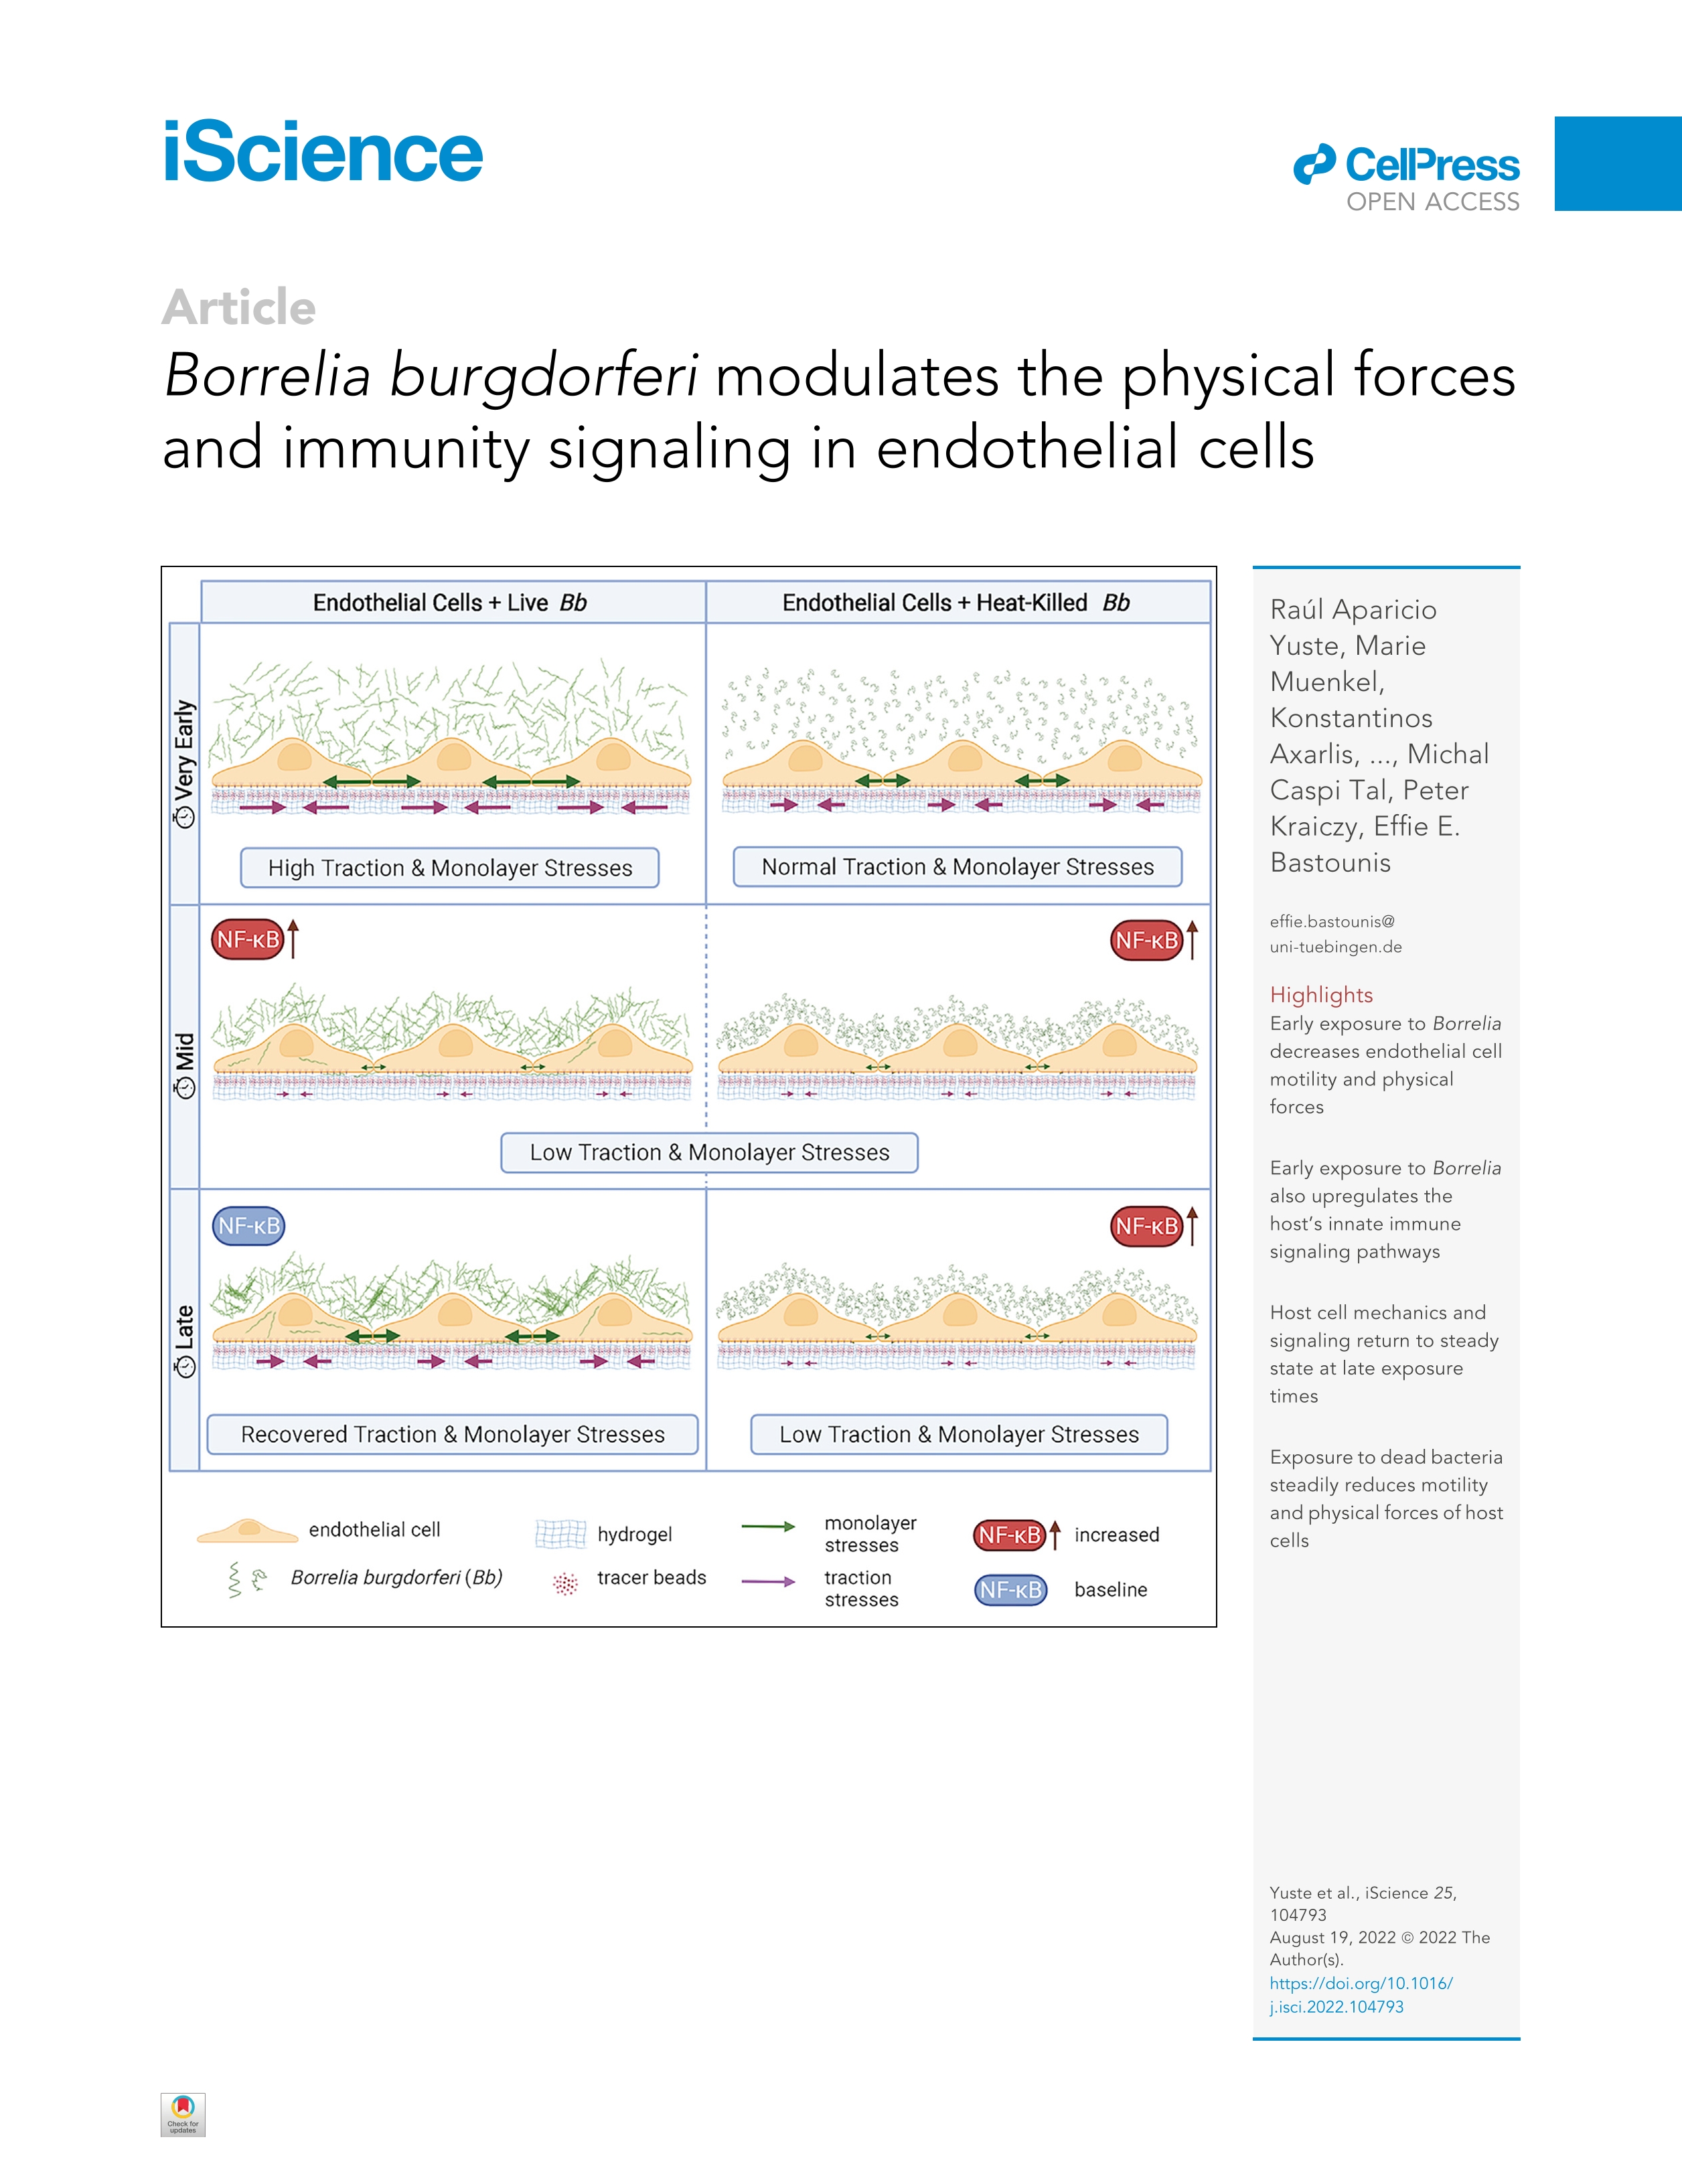 Borrelia burgdorferi modulates the physical forces and immunity signaling in endothelial cells